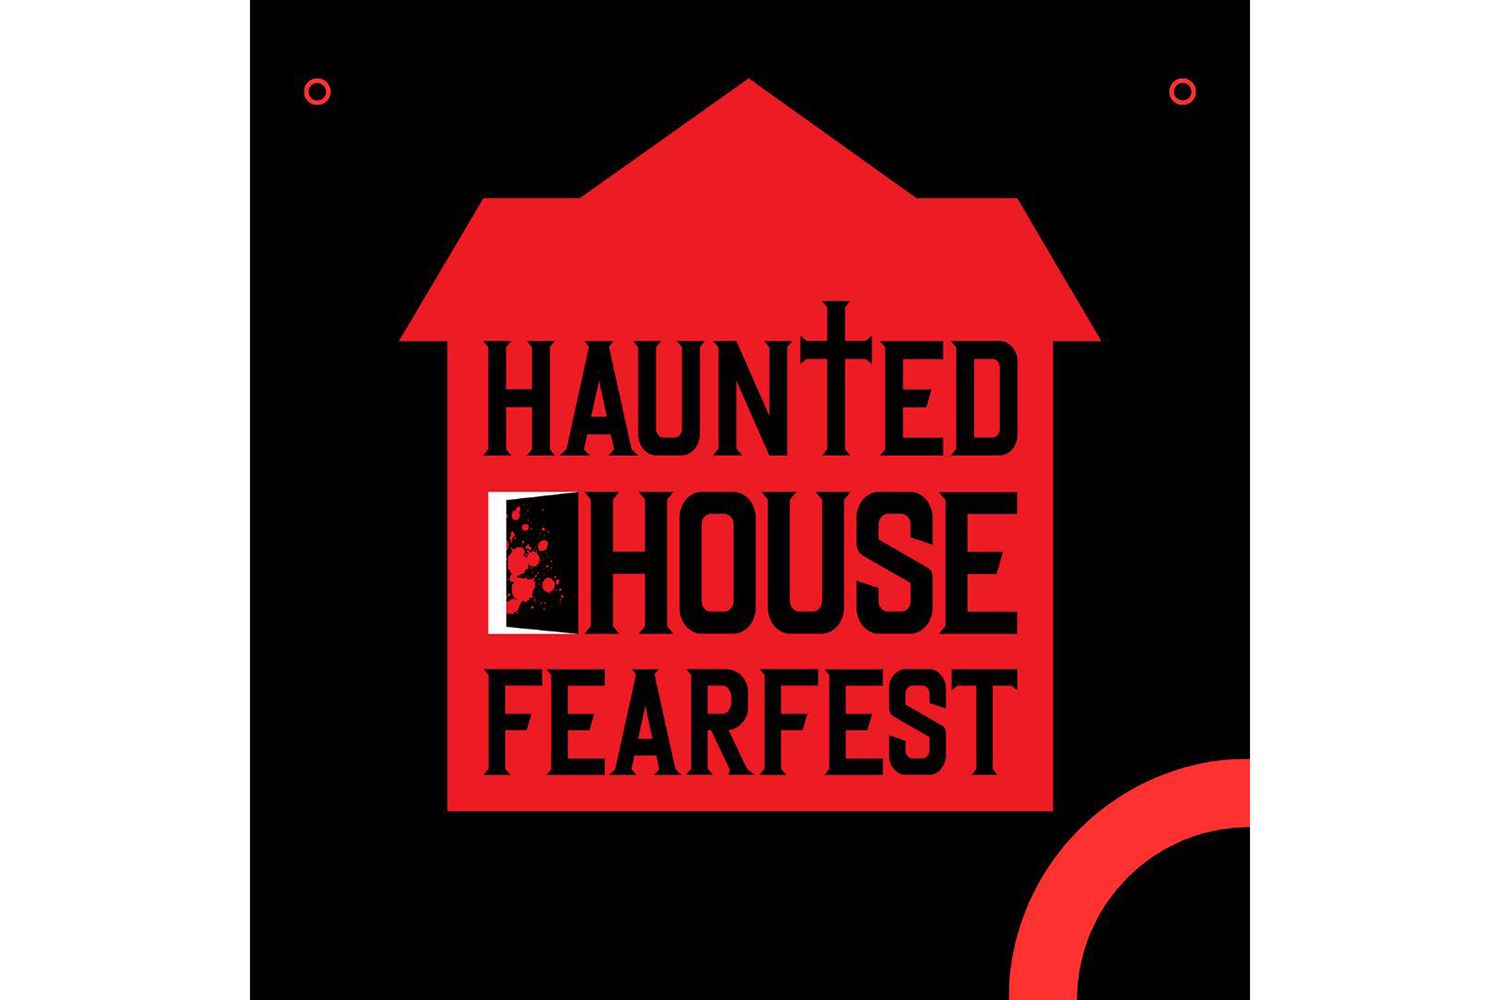 Haunted House FearFest horror film festival will terrify New Yorkers this Halloween